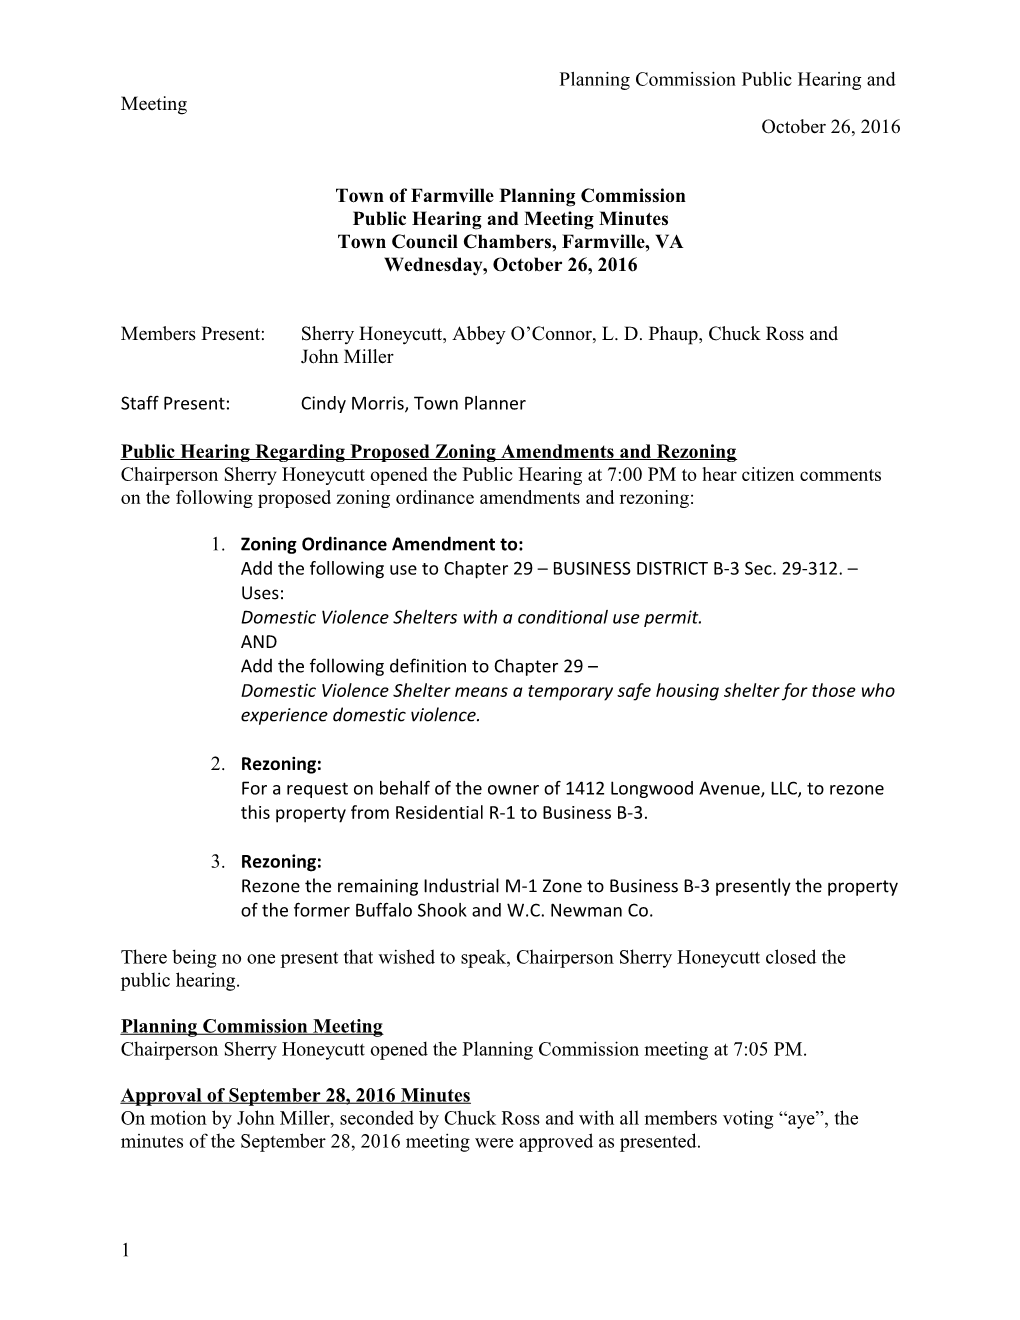 Planning Commission Public Hearing and Meeting